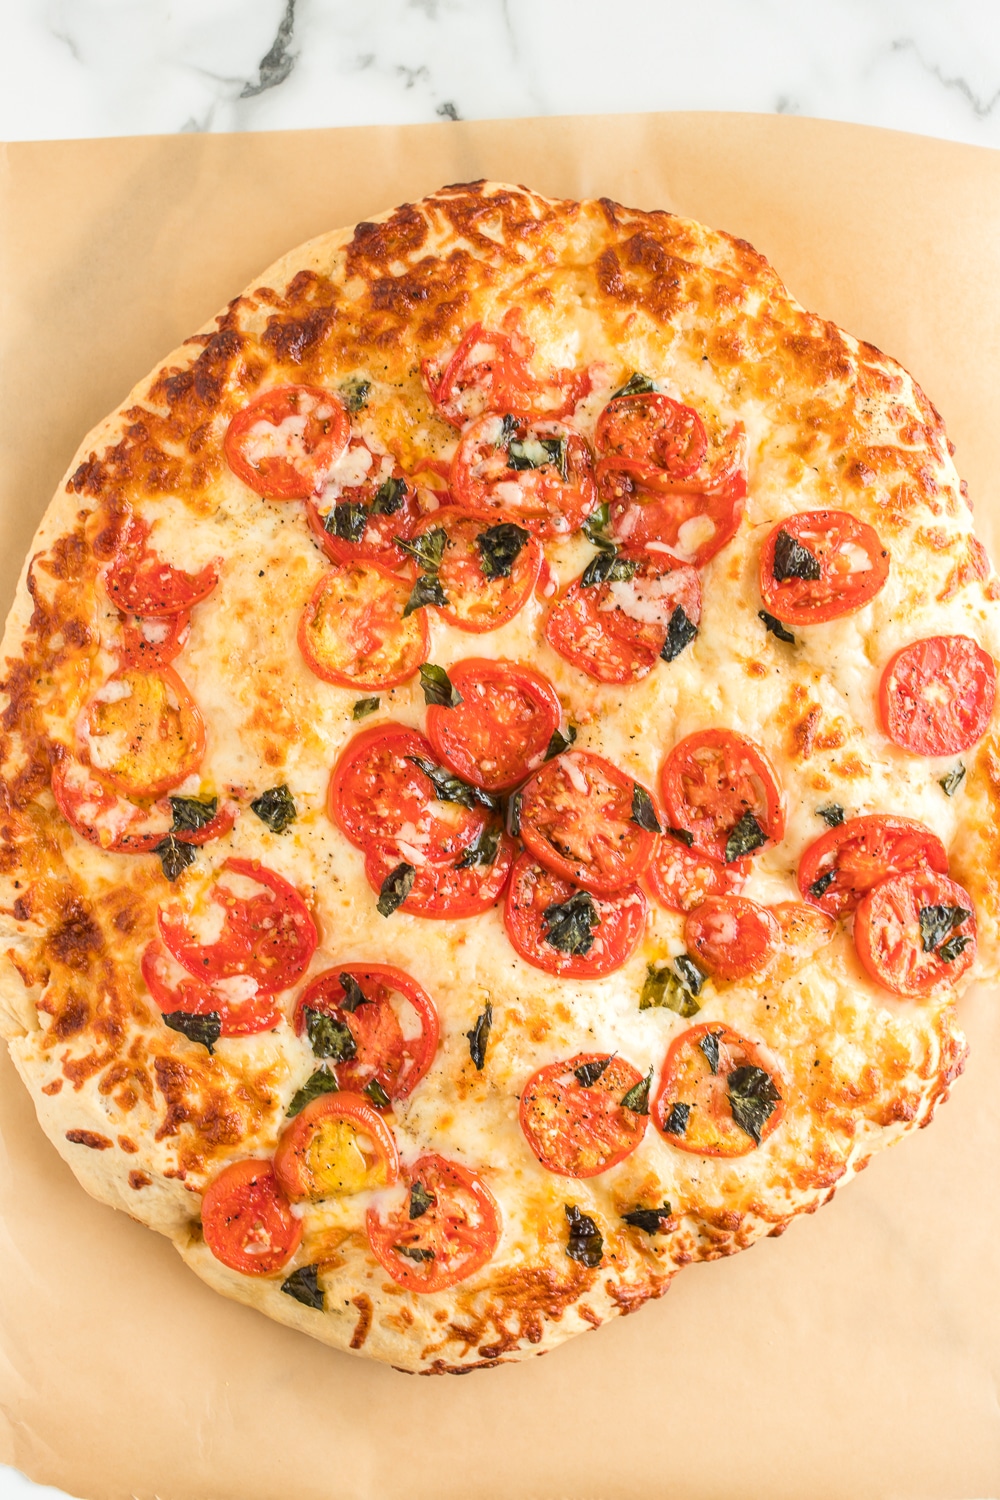 Margherita Pizza: a delicious homemade pizza full of flavor! Fresh tomatoes and basil are the key ingredients to this delicious and simple pizza recipe.